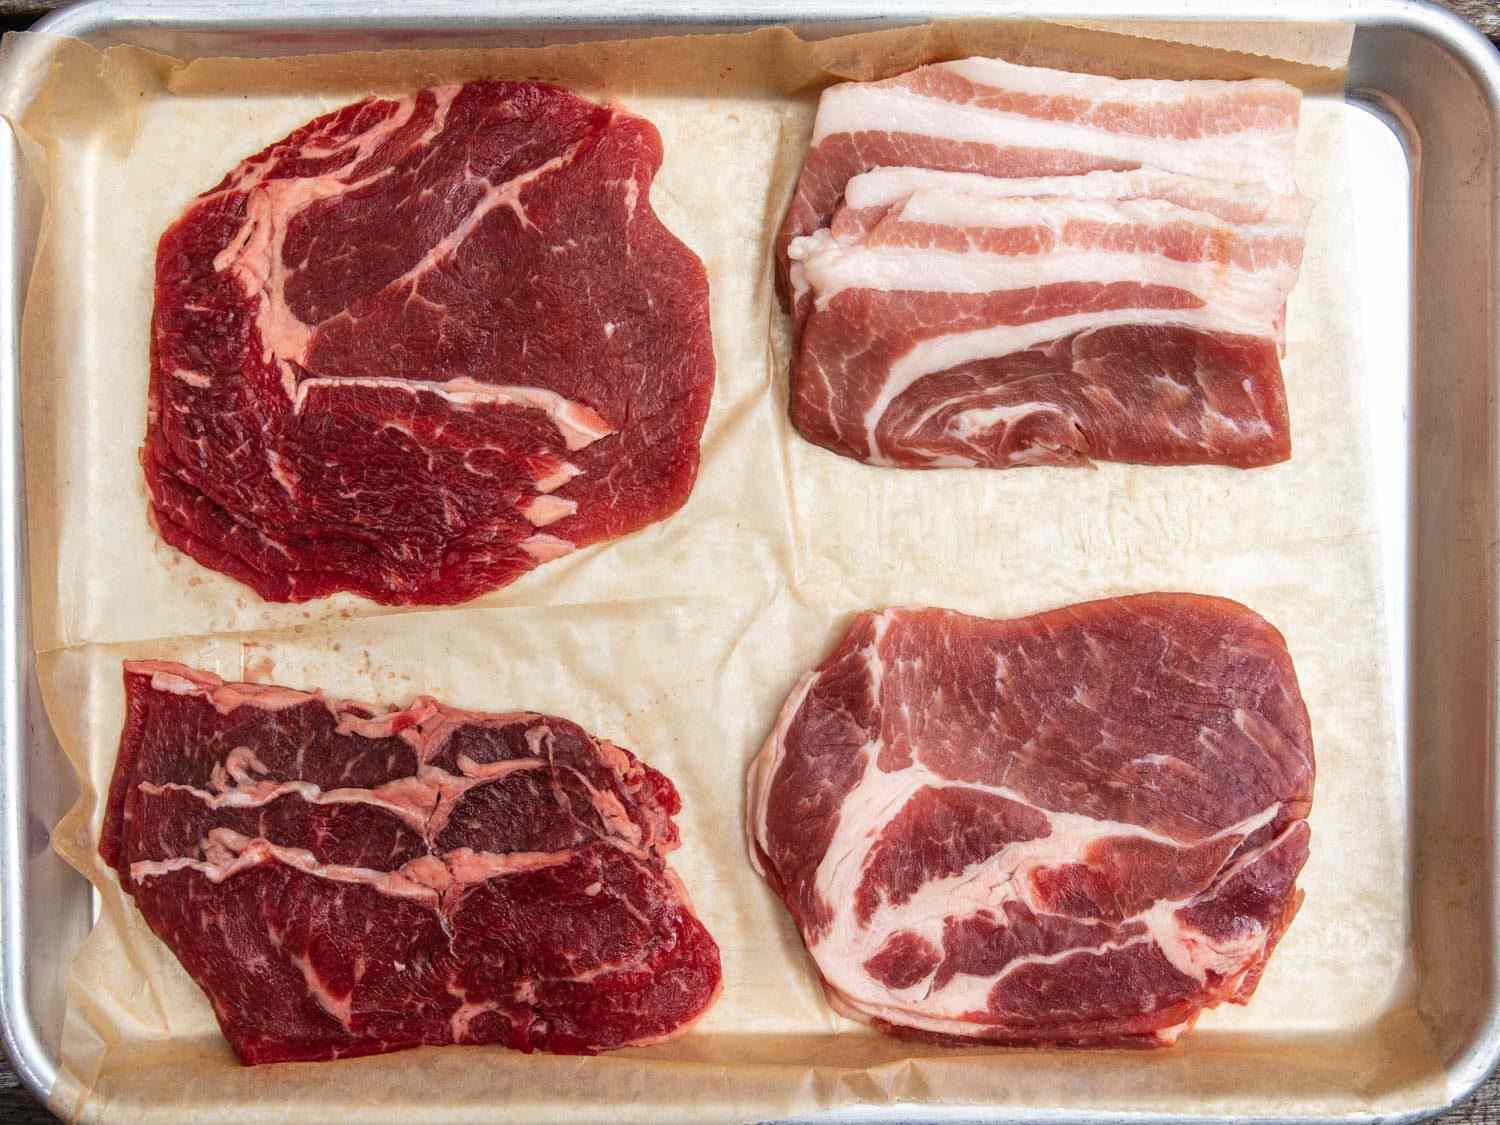 Different cuts of raw beef and pork for Korean barbecue, including thinly sliced ribeye and pork shoulder, and pieces of pork belly.